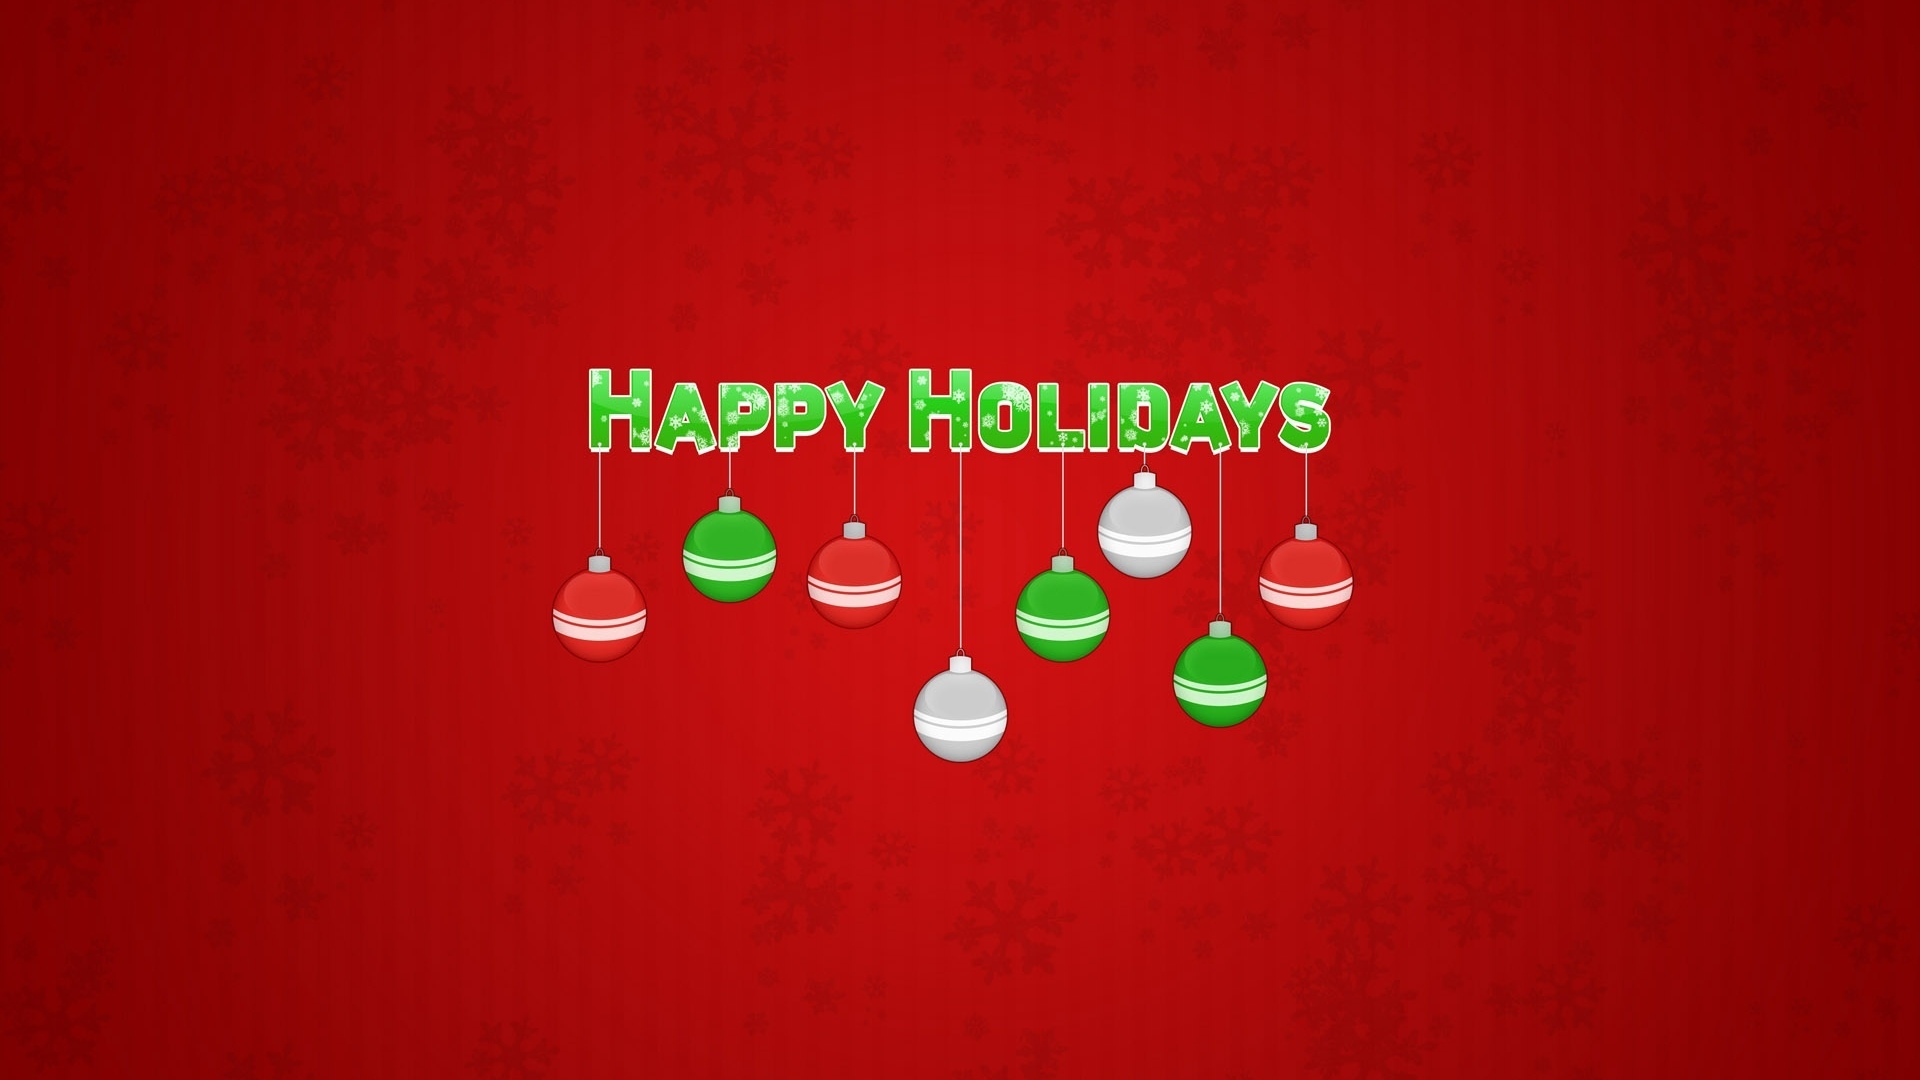 Happy Holidays Green on Red Background | CELEBRATE